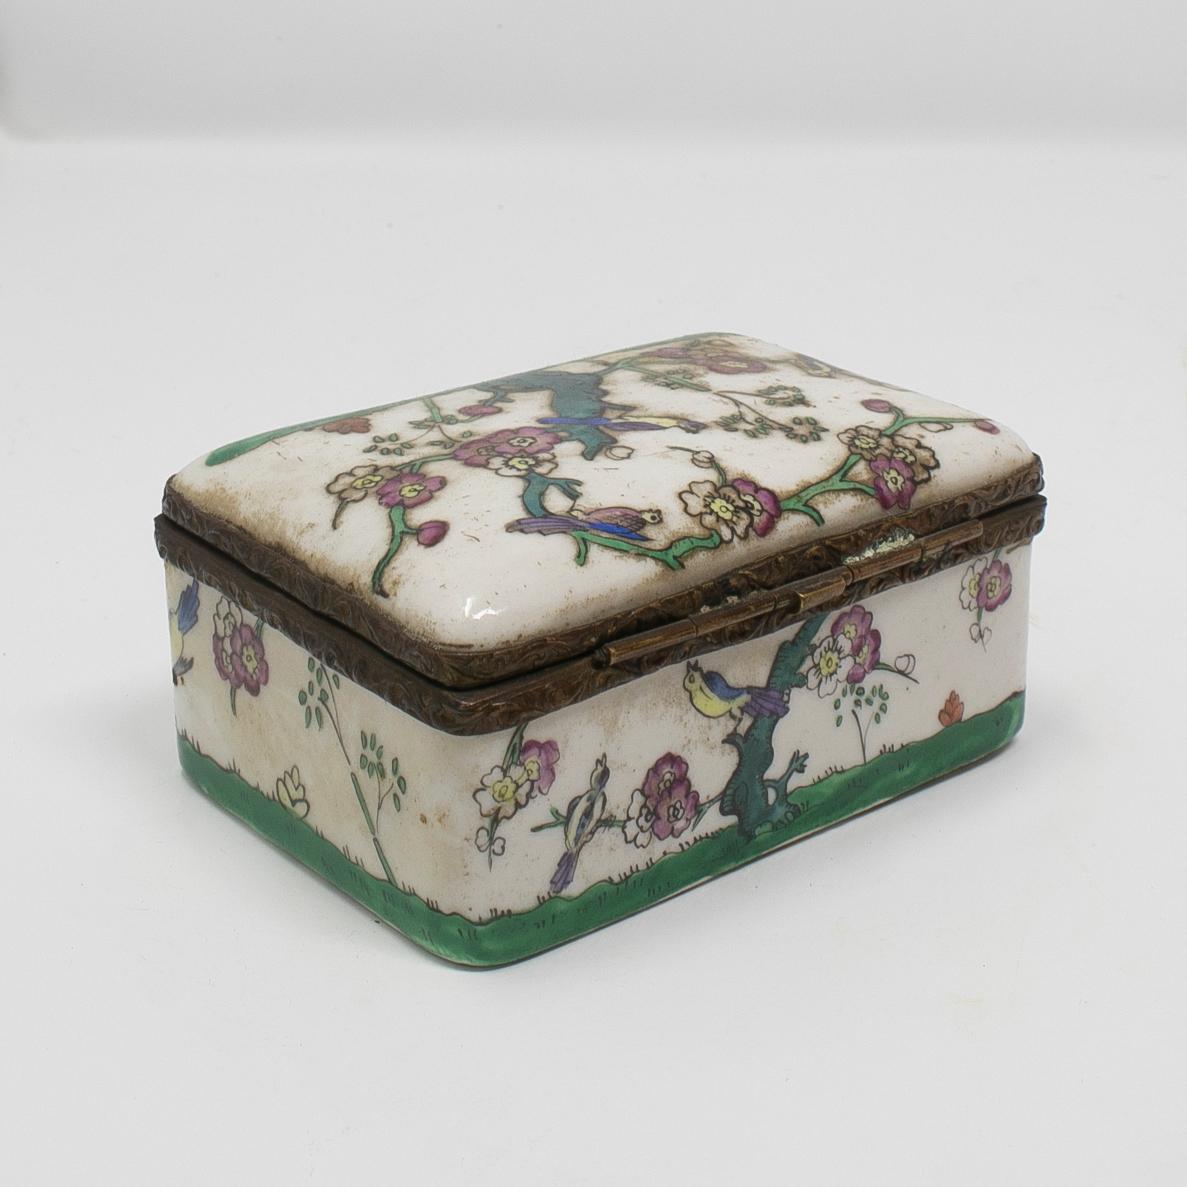 19th Century French Porcelain and Brass Trinket Box with Flower Decorations For Sale 1